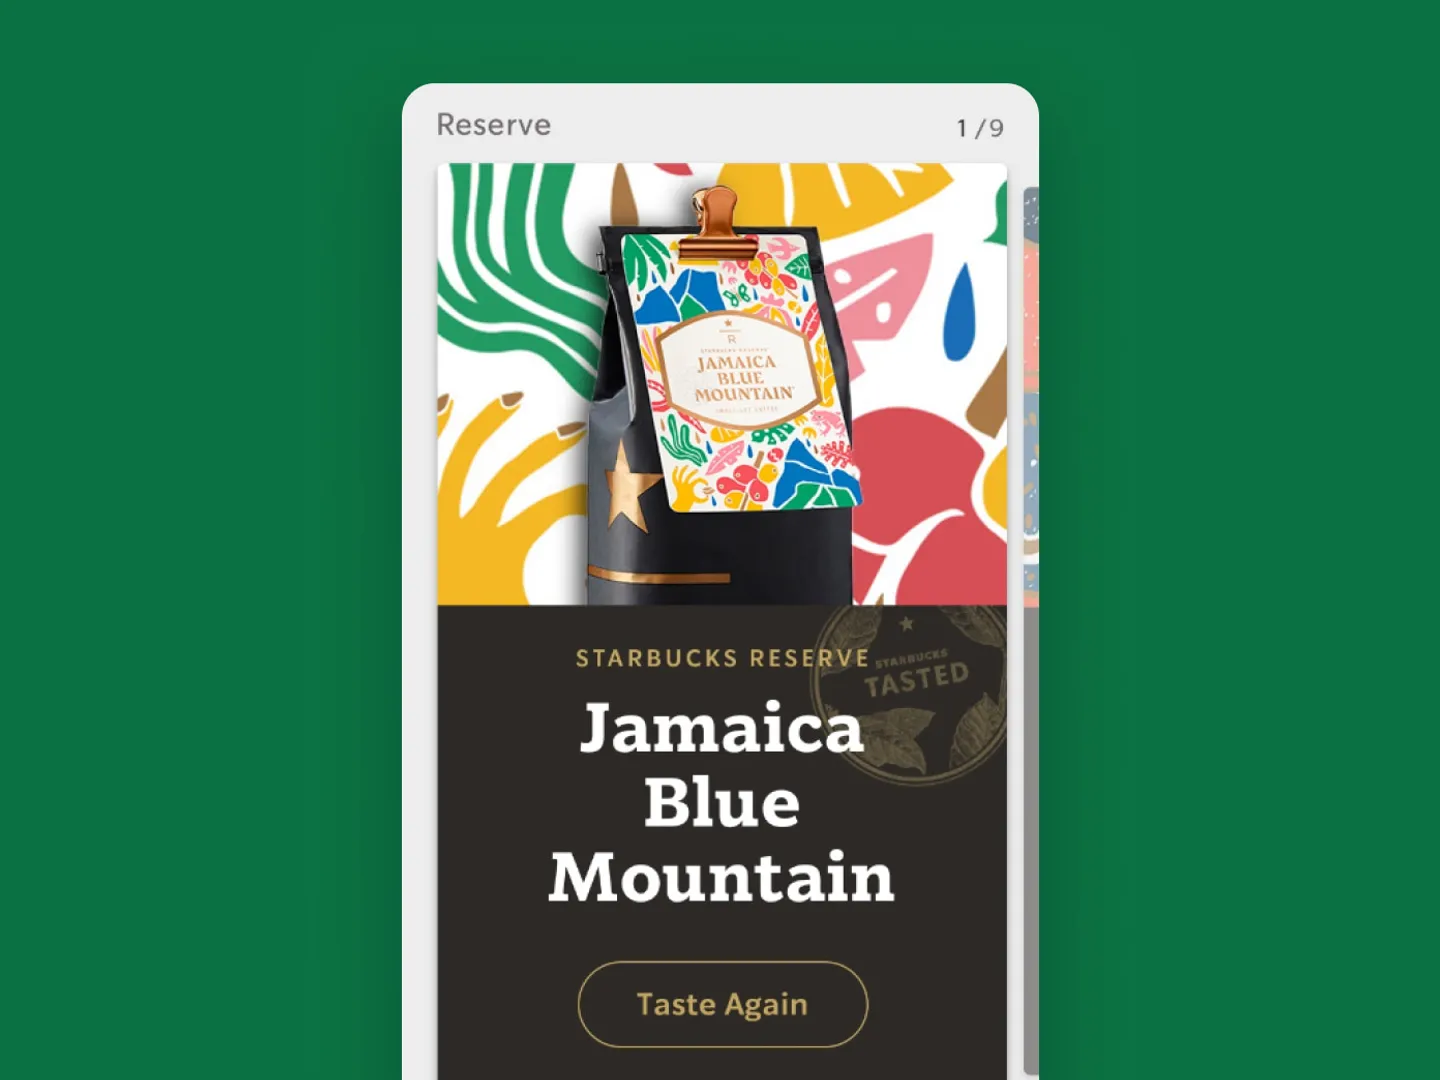 Image of an app screen showing a coffee name and branding